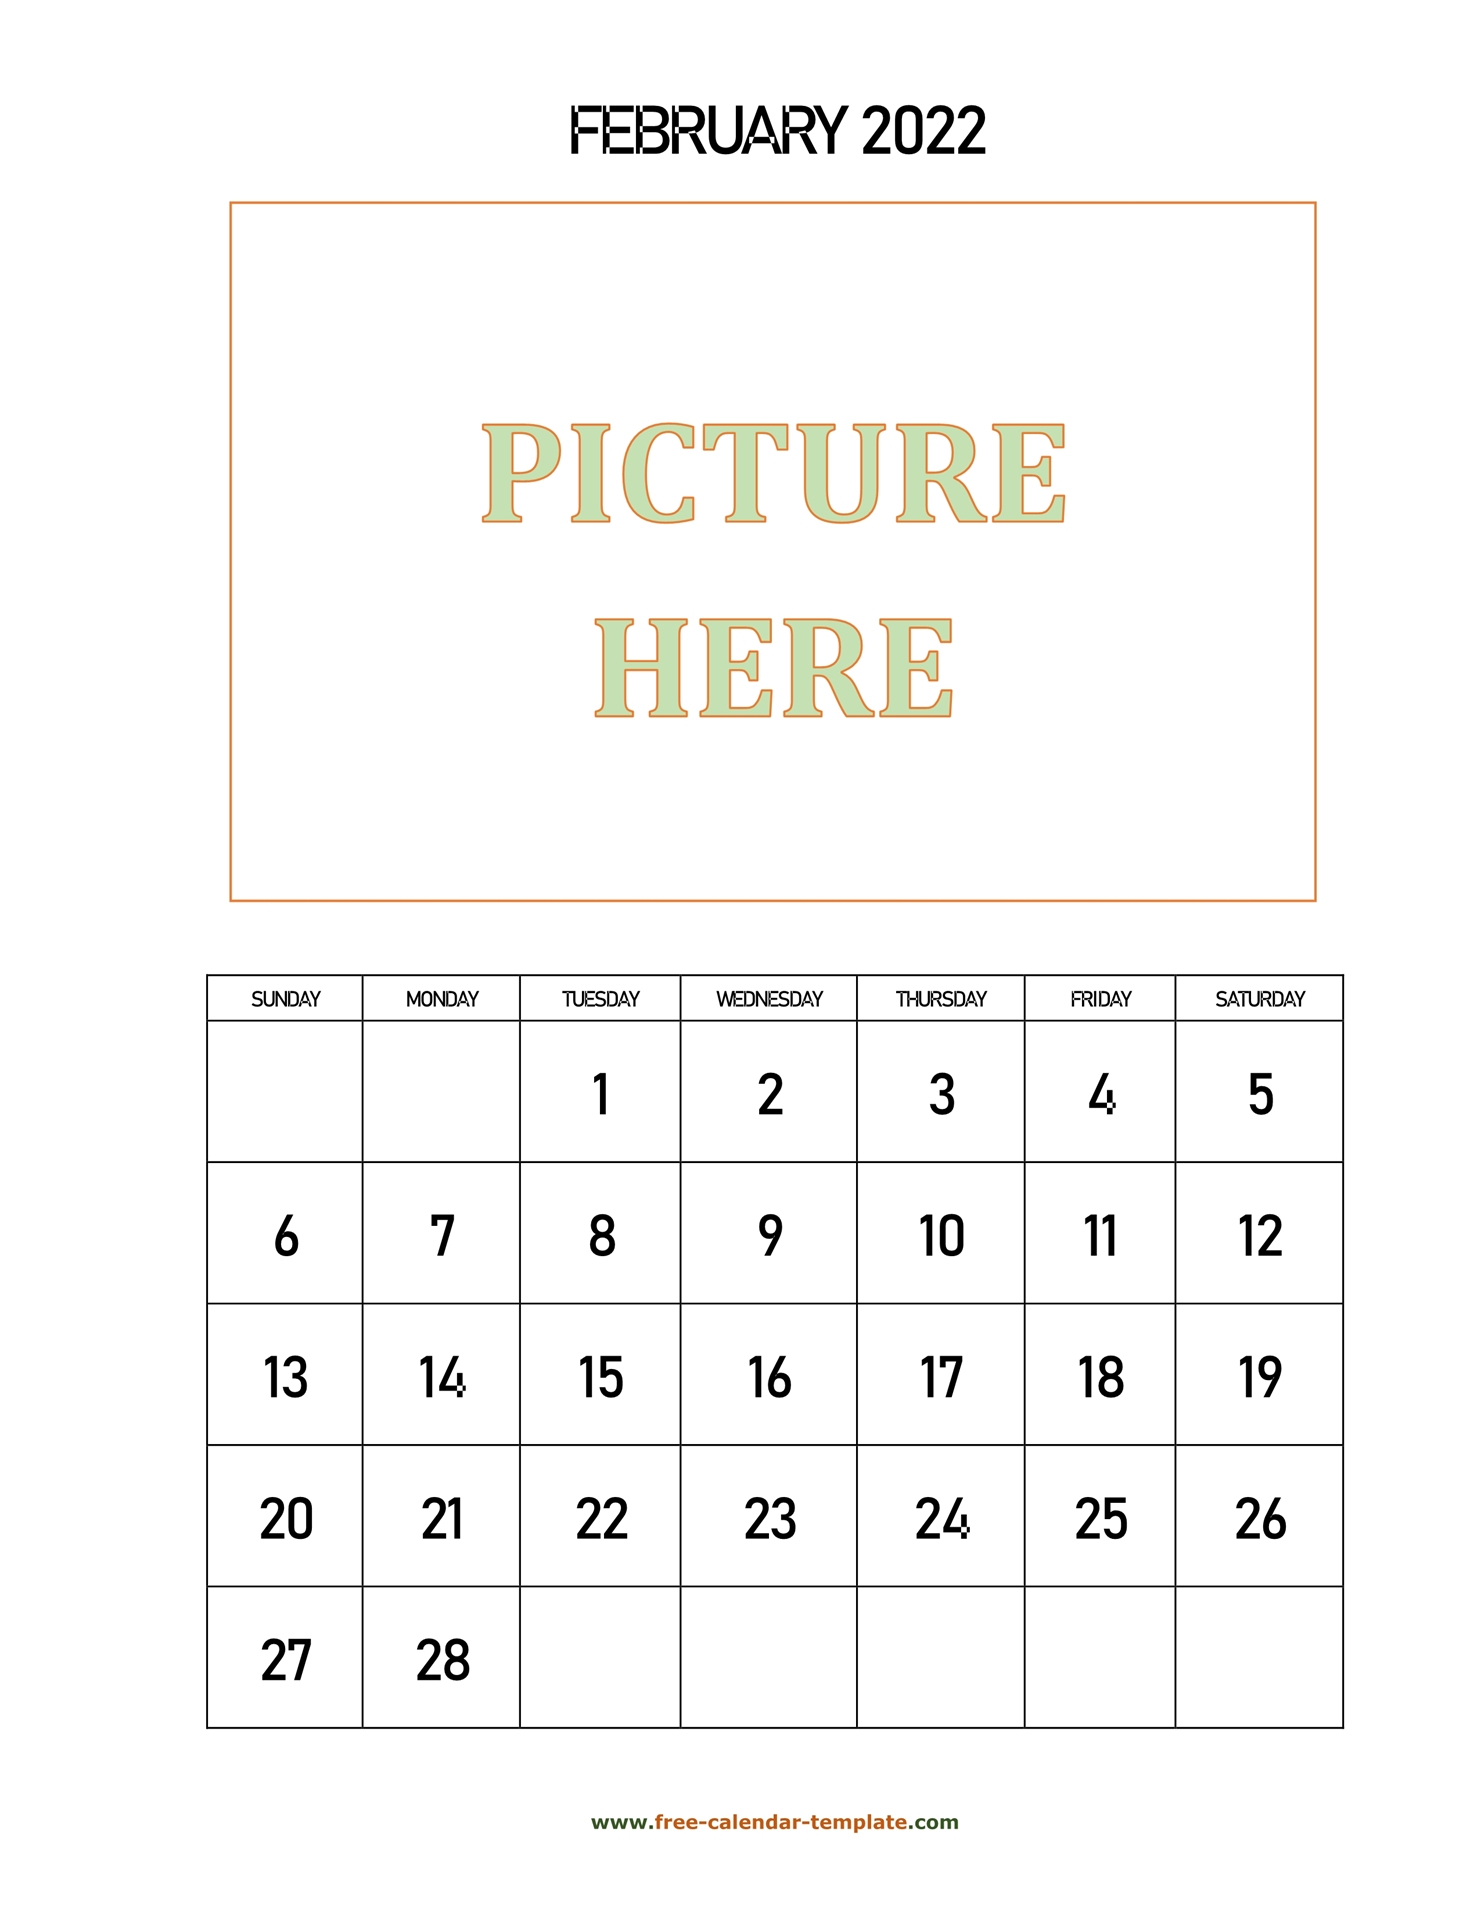 February Printable 2022 Calendar, Space For Add Picture (Vertical) | Free-Calendar-Template